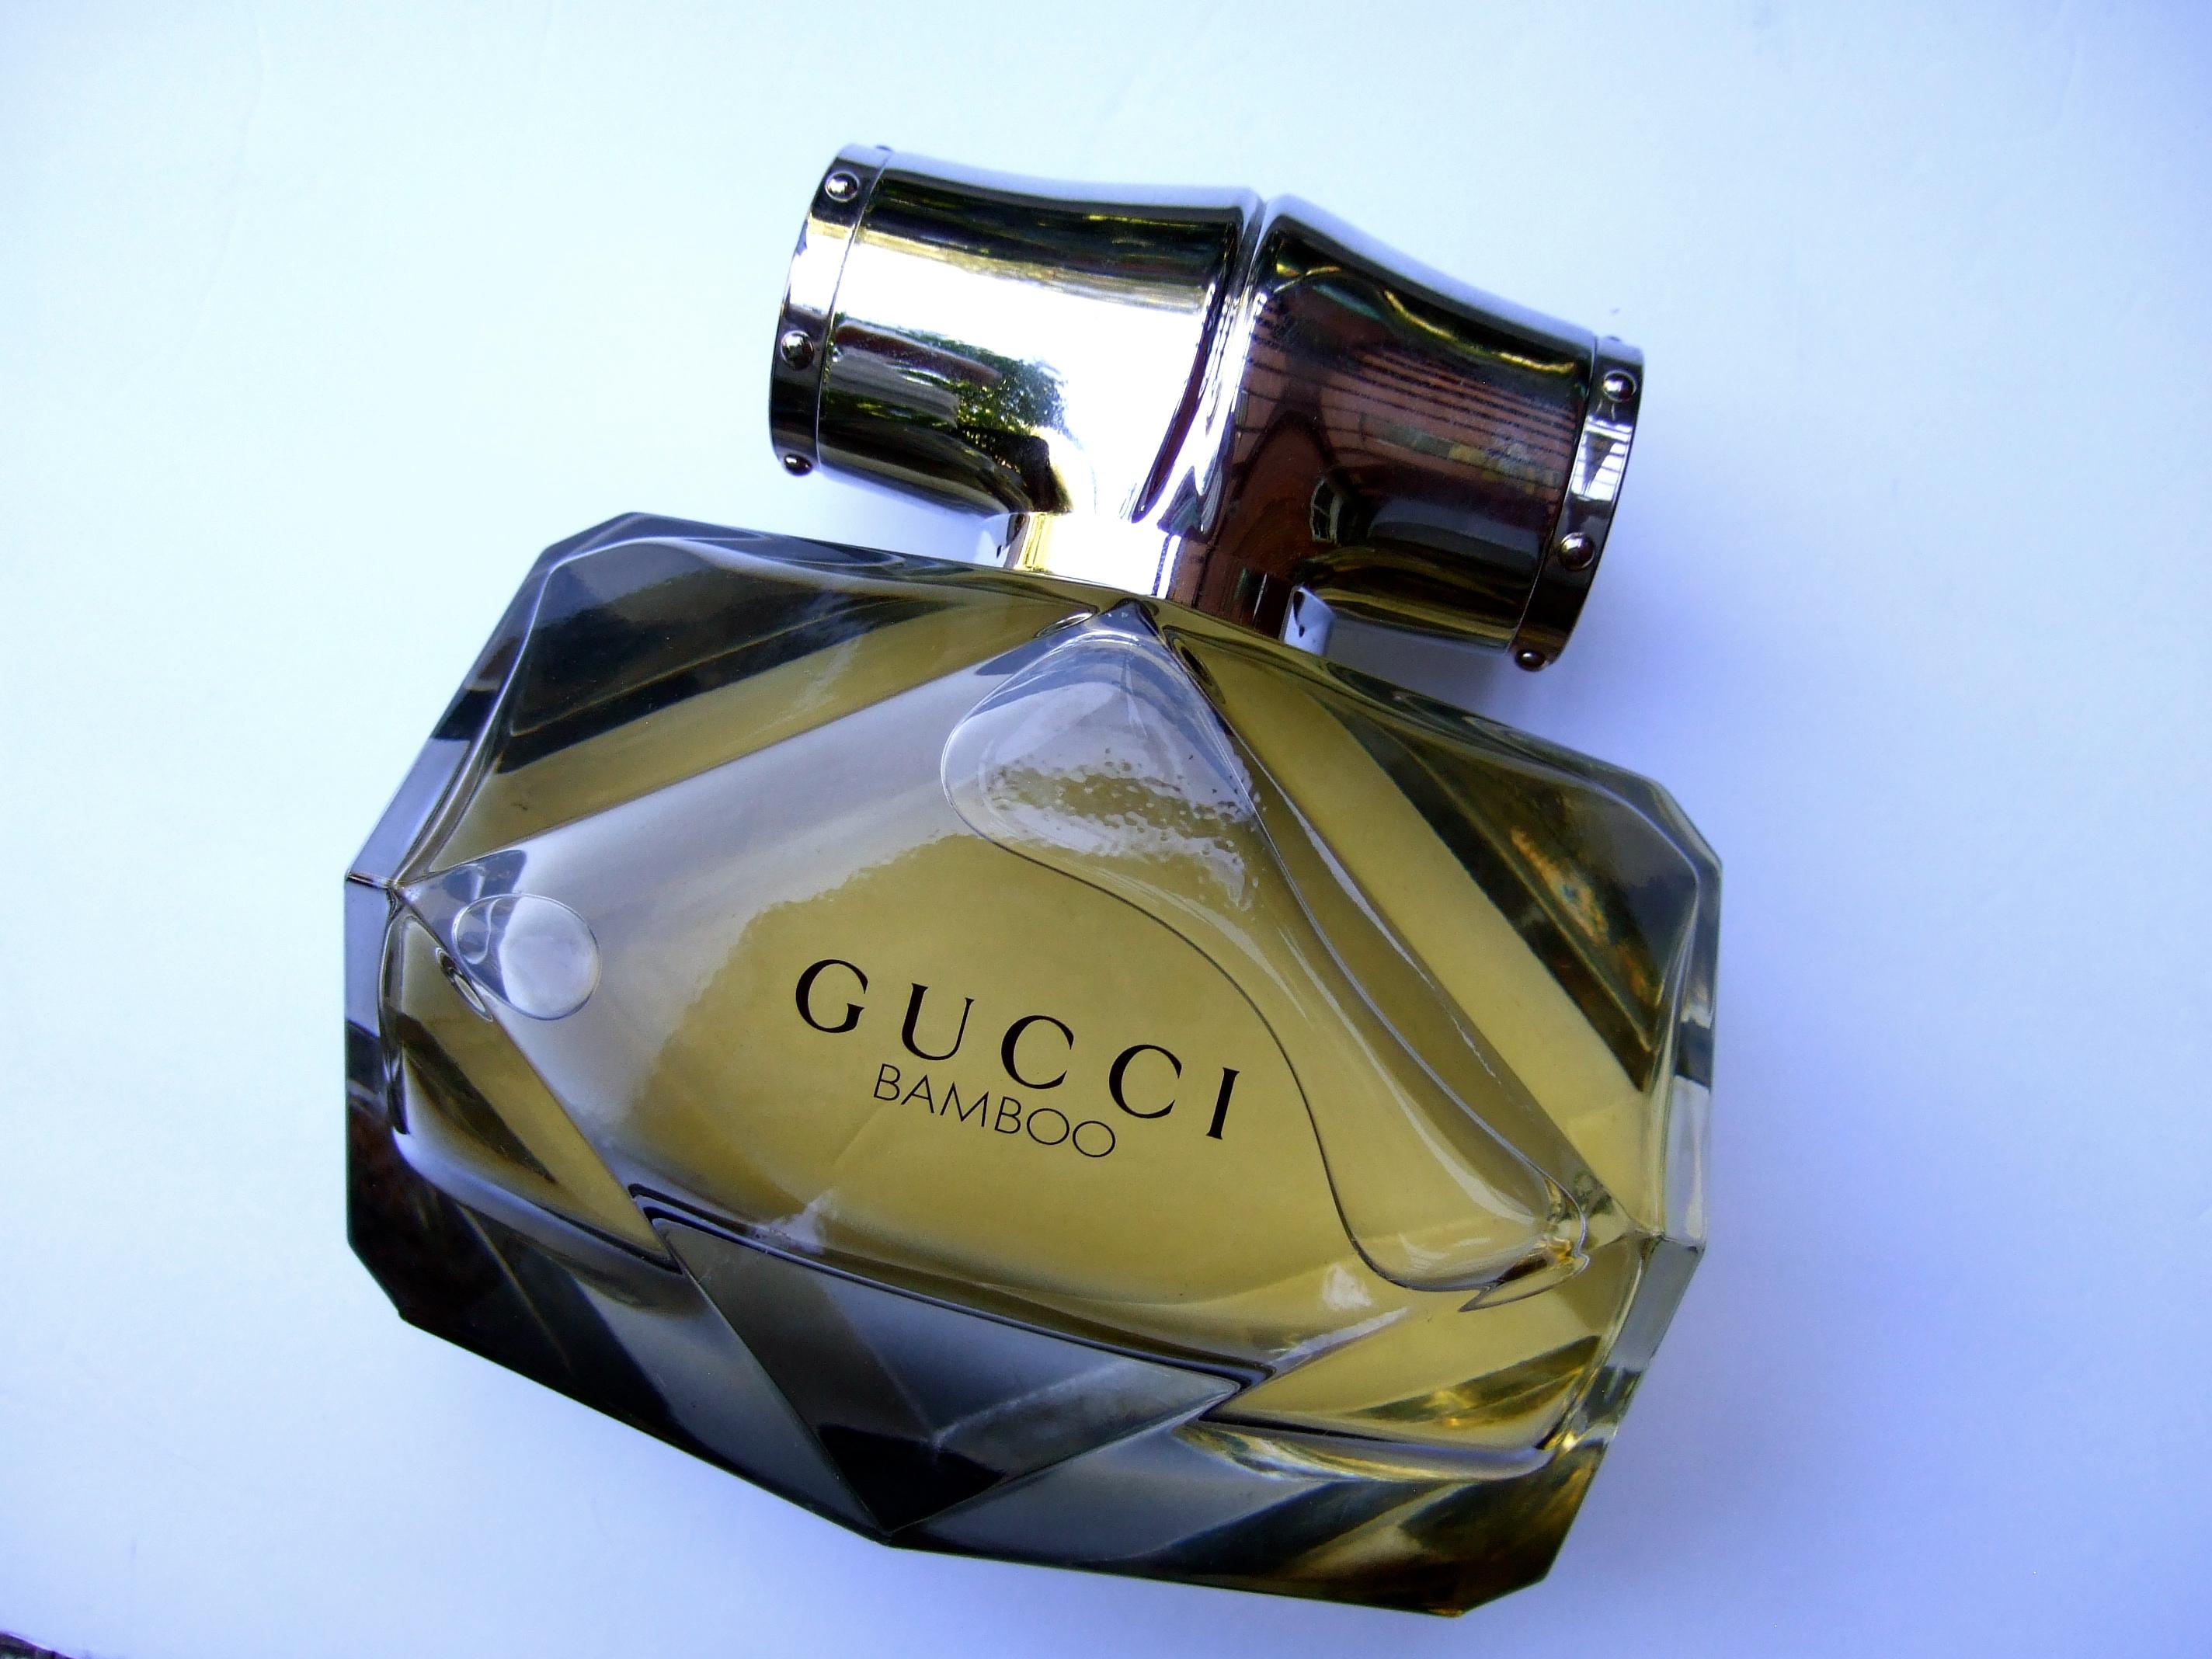 Gucci Bamboo Huge Glass Factice Faceted Display Dekorative Flasche c 21st c  im Angebot 4